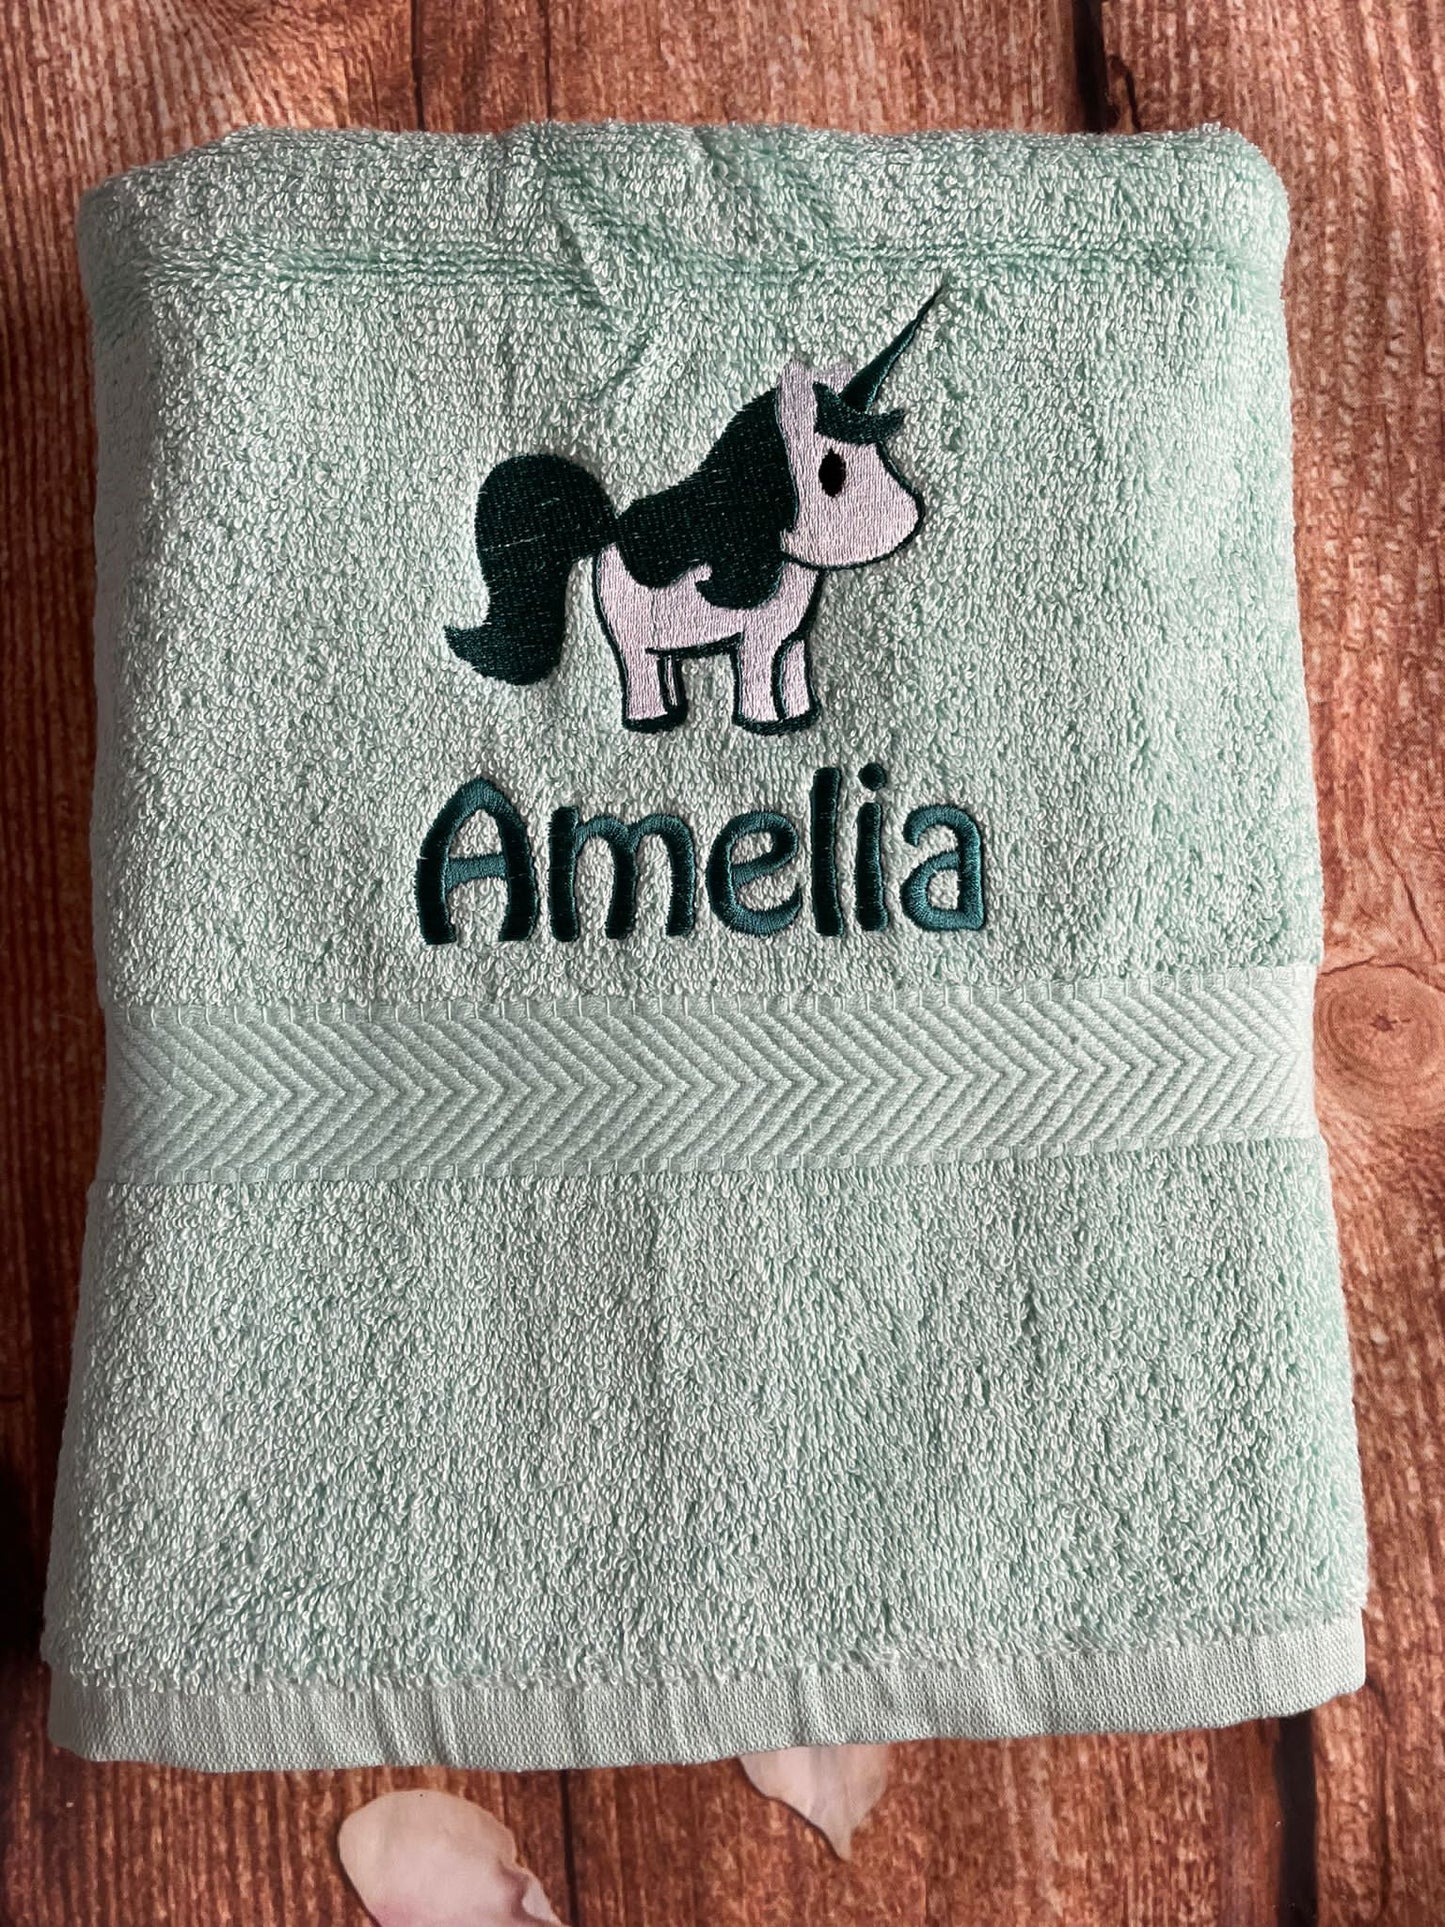 Embroidered personalised swimming or sports towel. Ideal gift // Unicorn